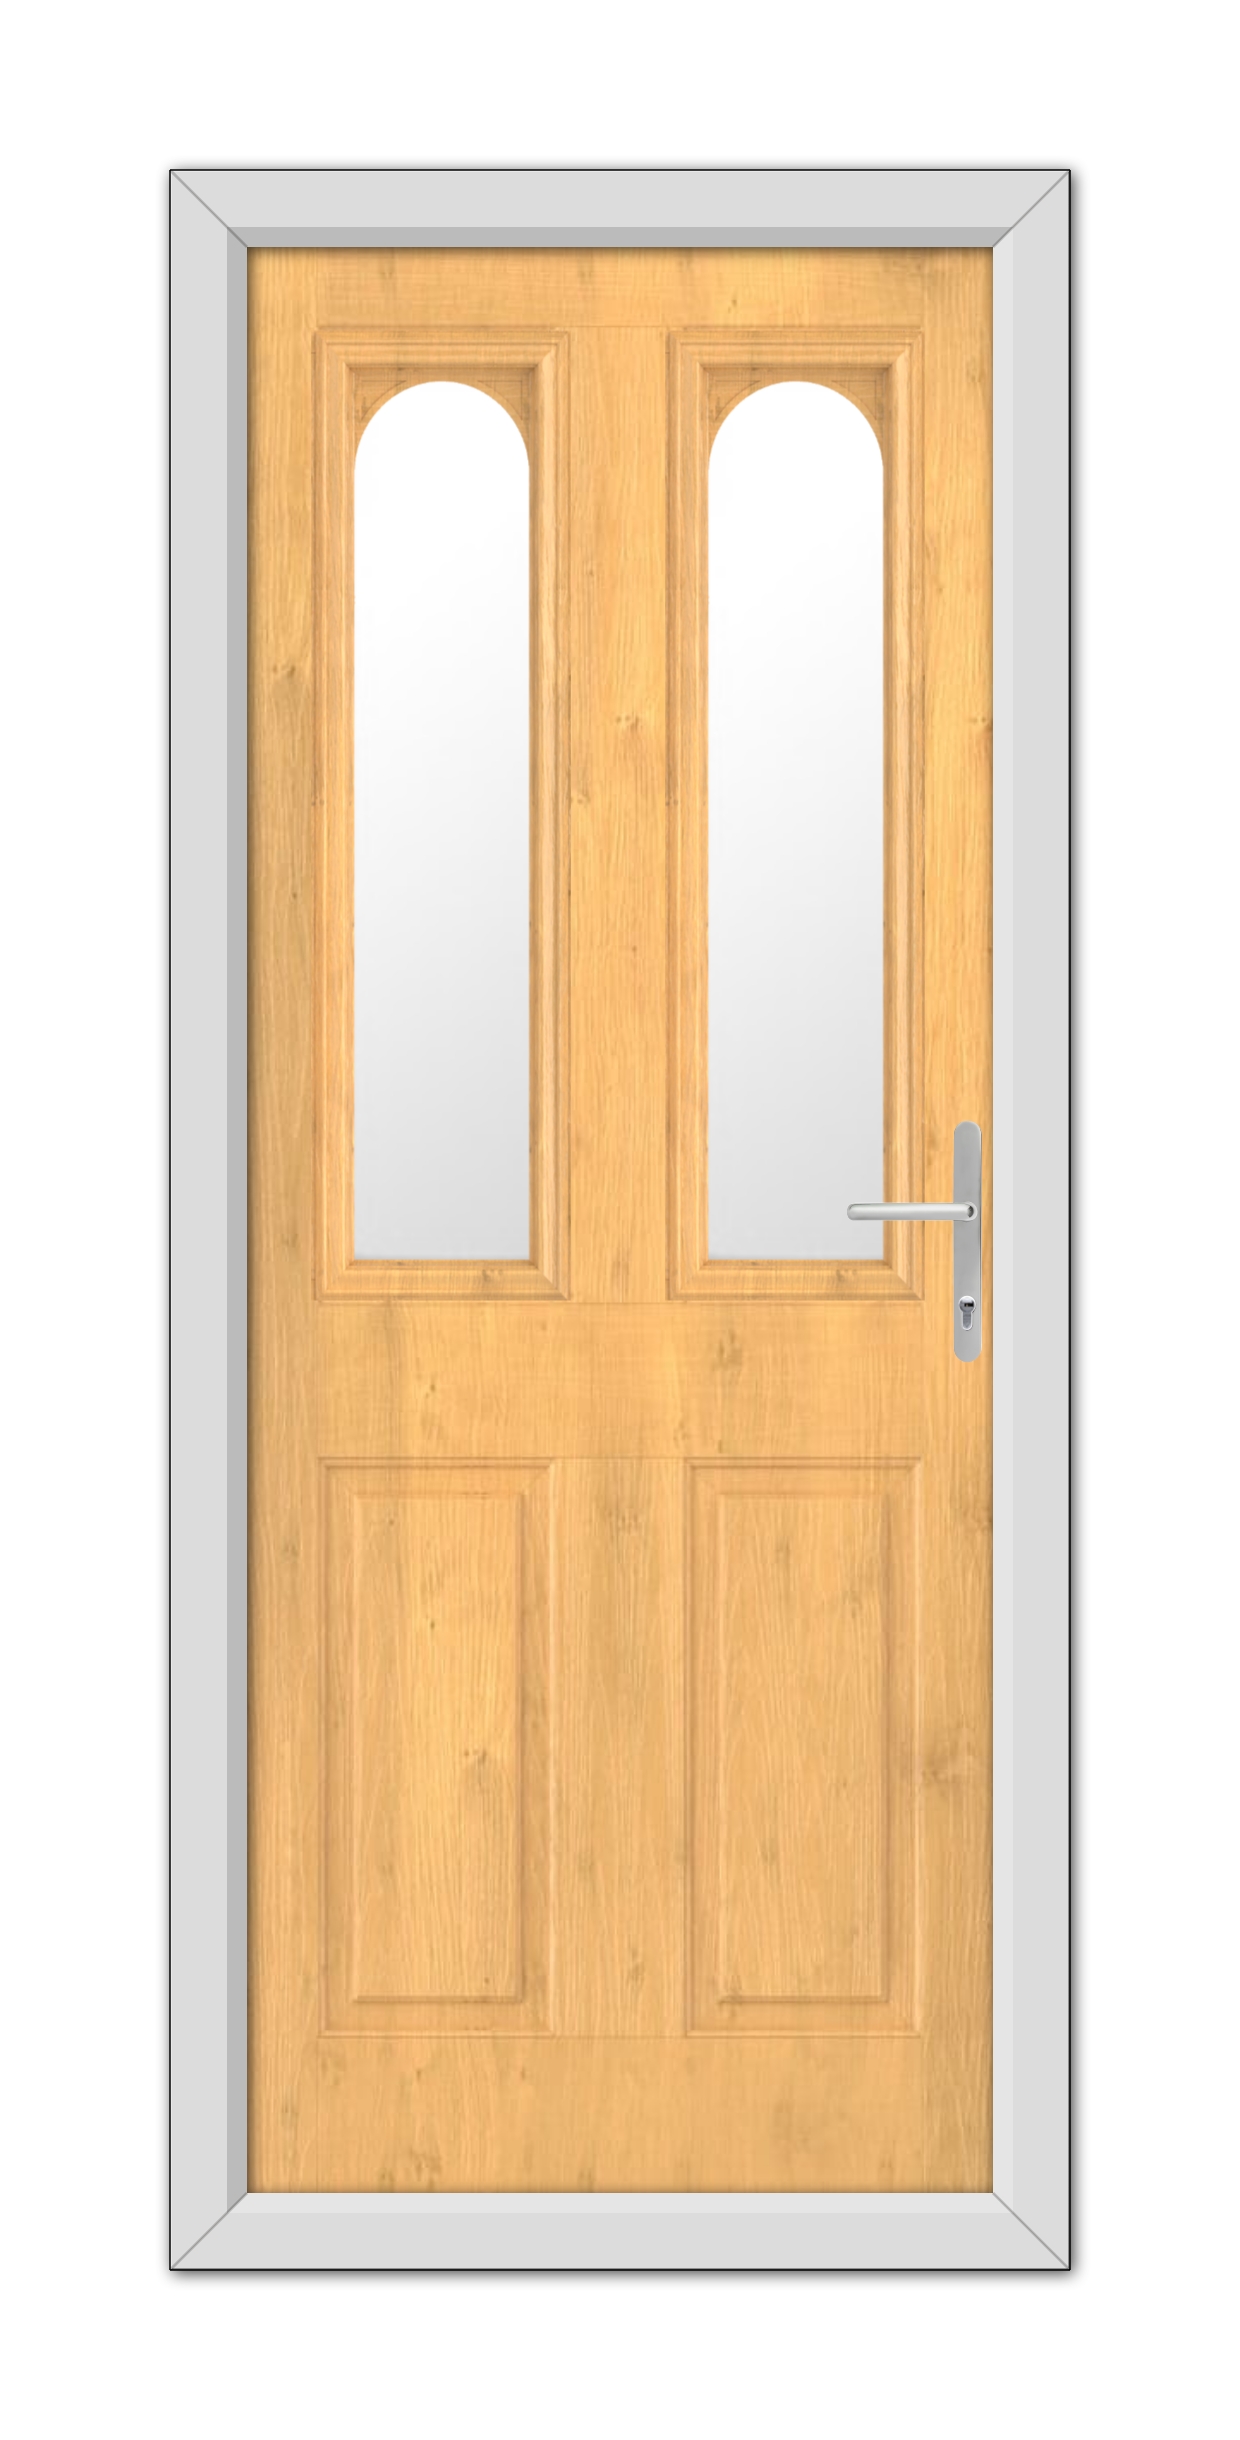 Irish Oak Elmhurst Composite Door 48mm Timber Core with glass panels and a modern handle, set within a gray frame, isolated on a white background.